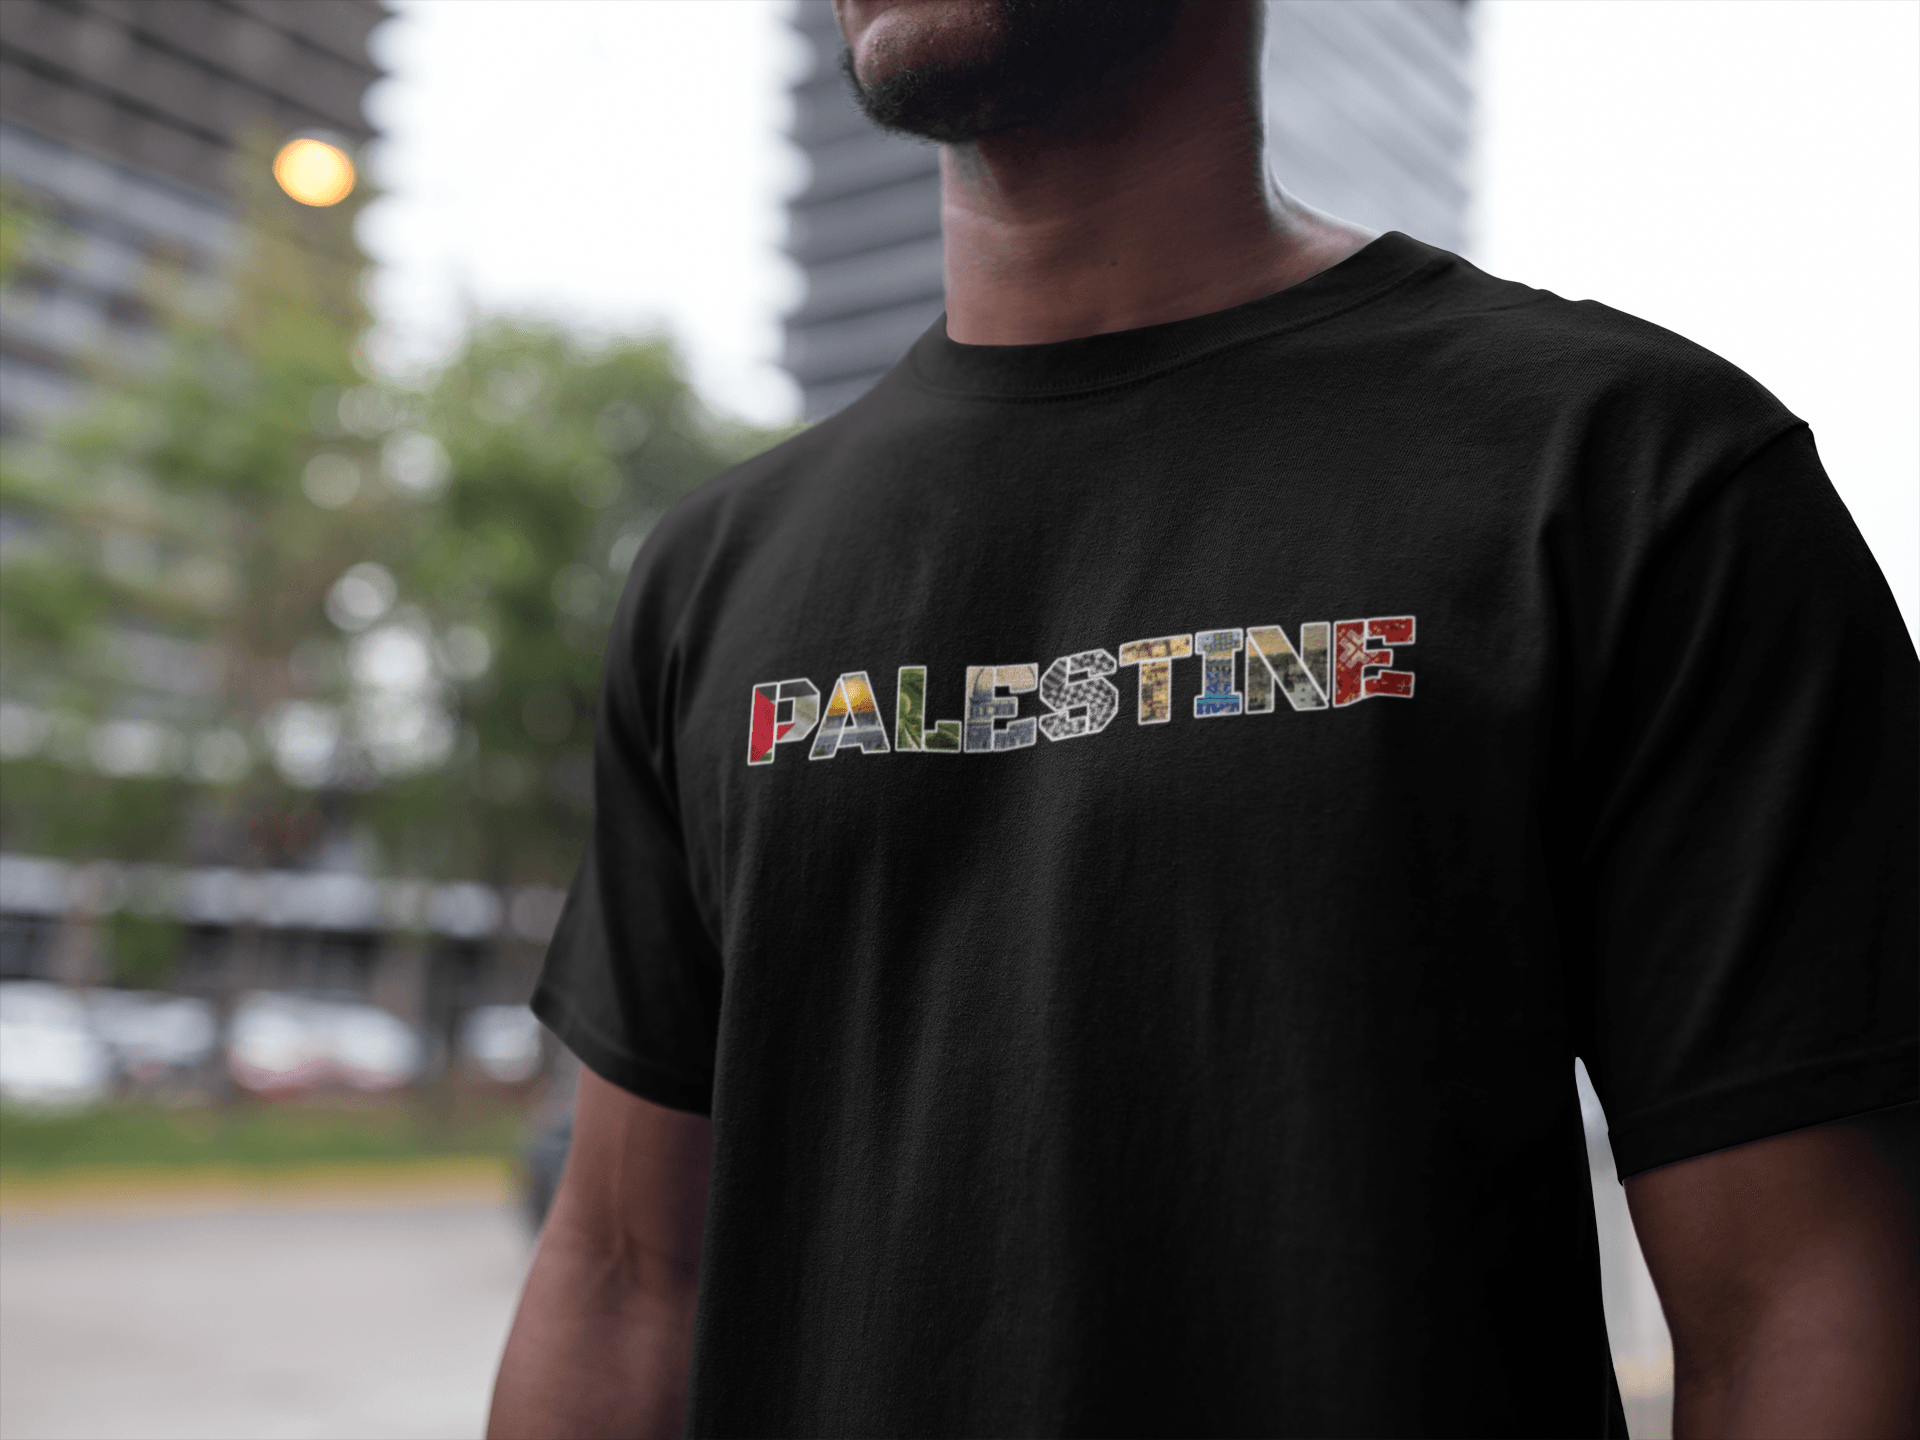 Palestine Images in Text Palestinian Support Tshirt - SunnahBay